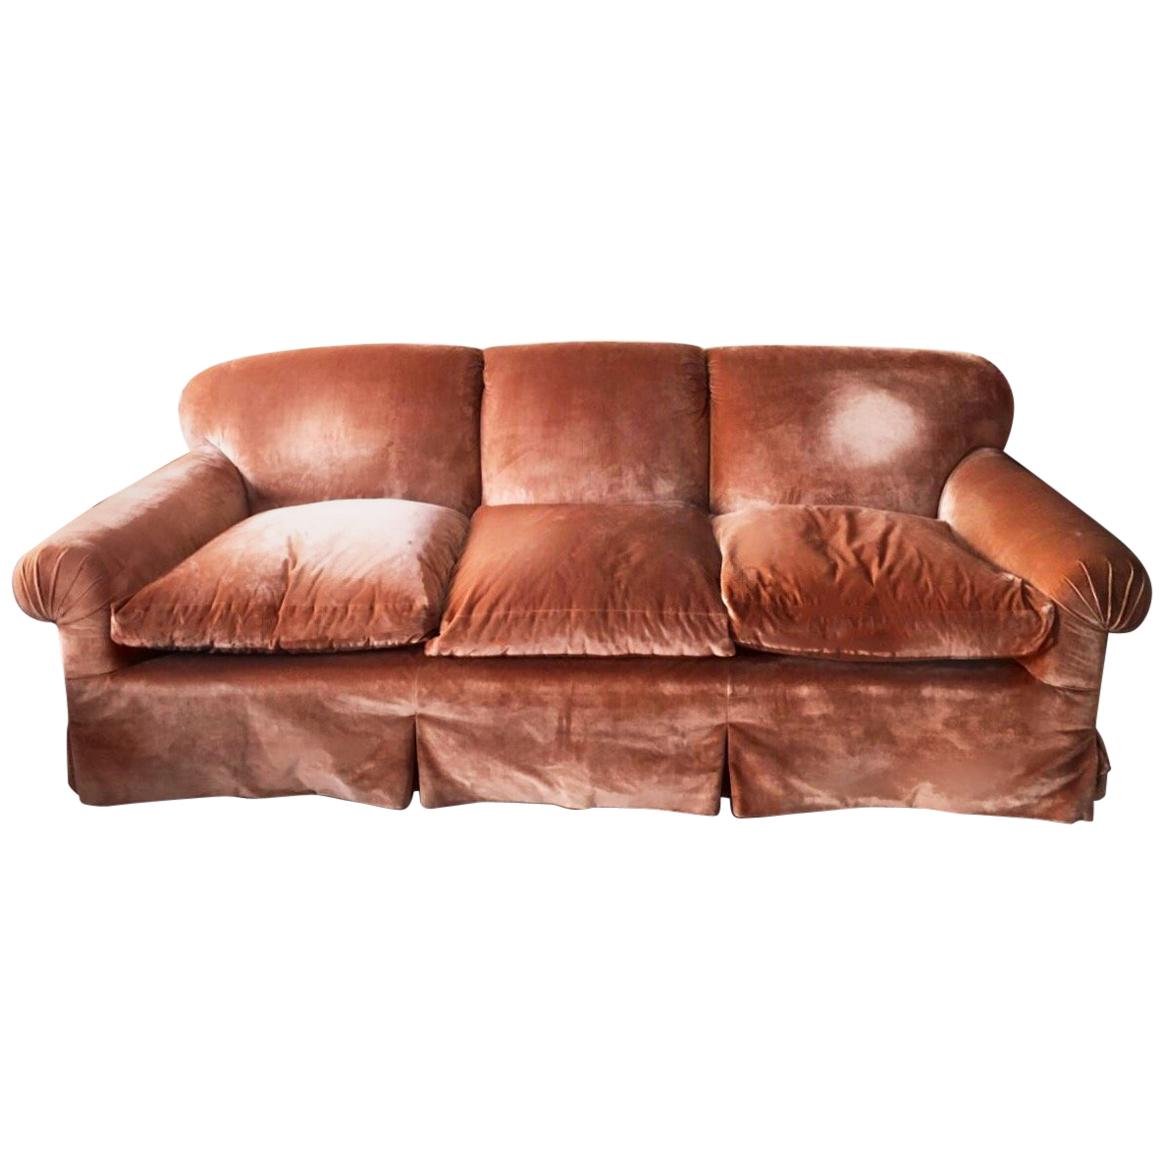 Cavendish tight back sofa BR2004. Down-filled luxury. Solid, handmade piece. Wooden feet. Extremely rare, custom ordered. Original retail price over 19,000 USD. There is normal - light wear for a couch that is 20+yrs old, however it has been well